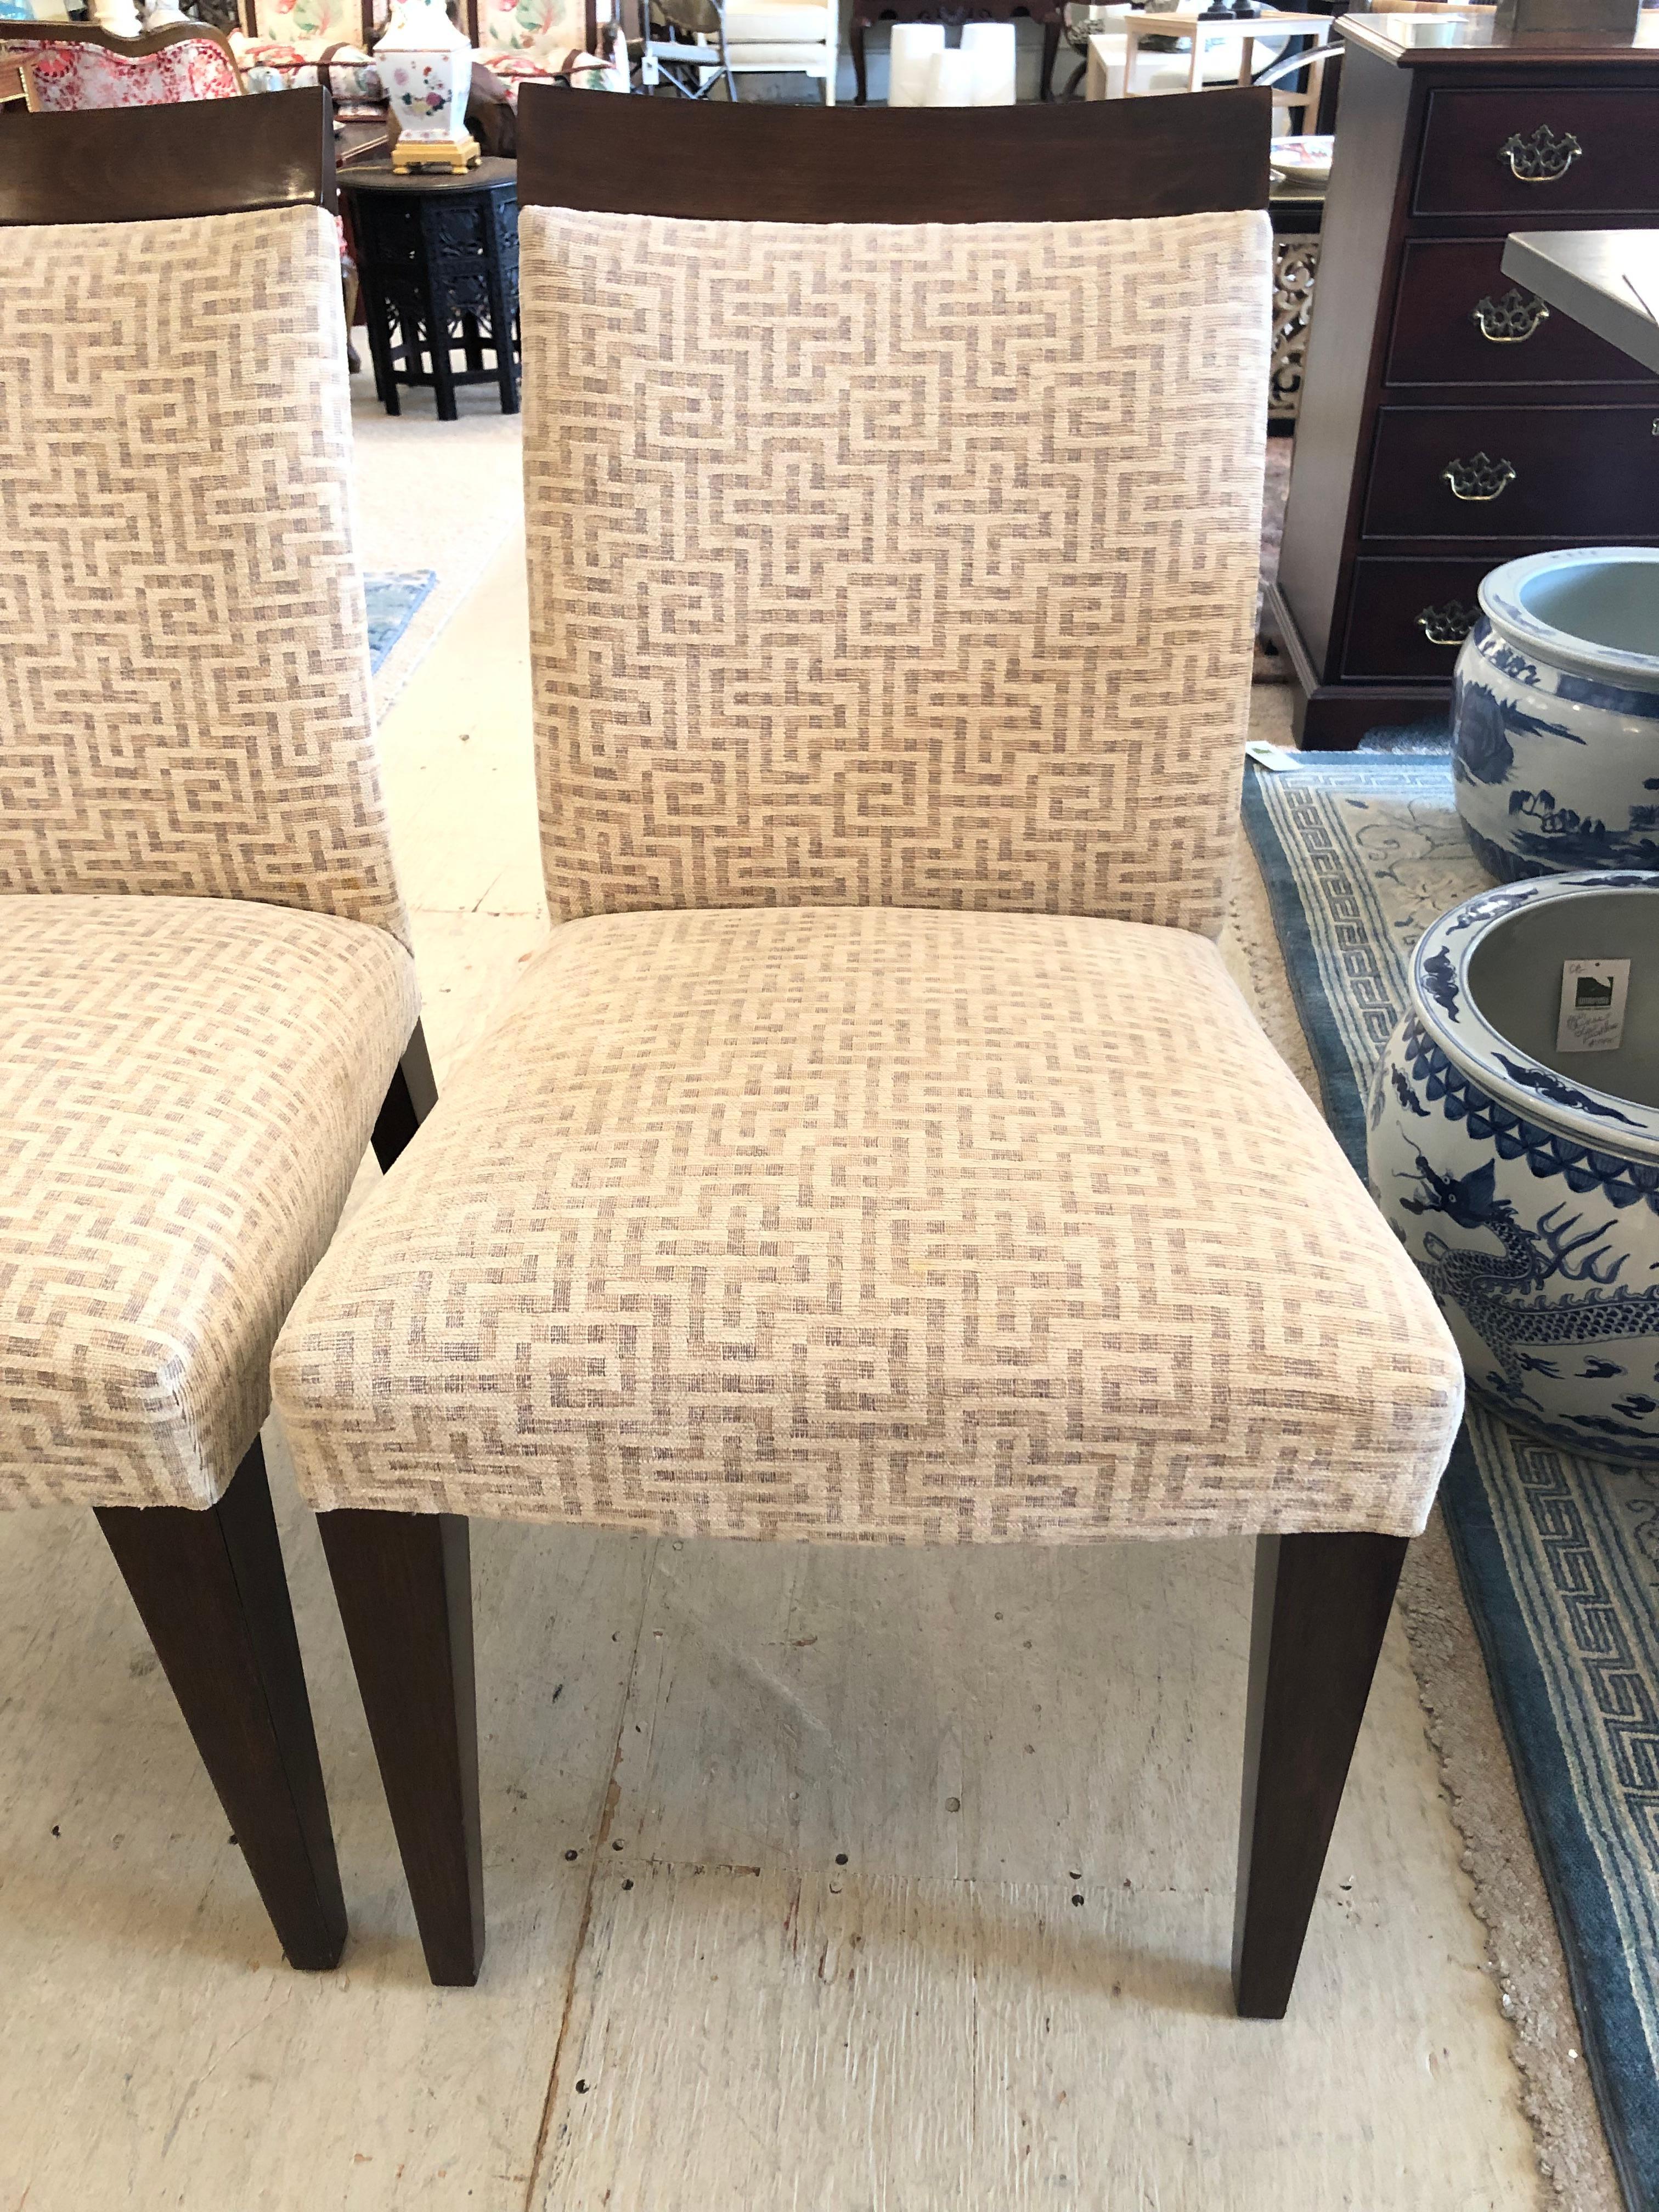 Super sophisticated richly made pair of Einstein side chairs by Artistic Frame, having mahogany legs and tops of the chairs with stunning neutral geometric upholstery in beige, taupe and grey.

Note:  Other chairs can be ordered;  price upon request.